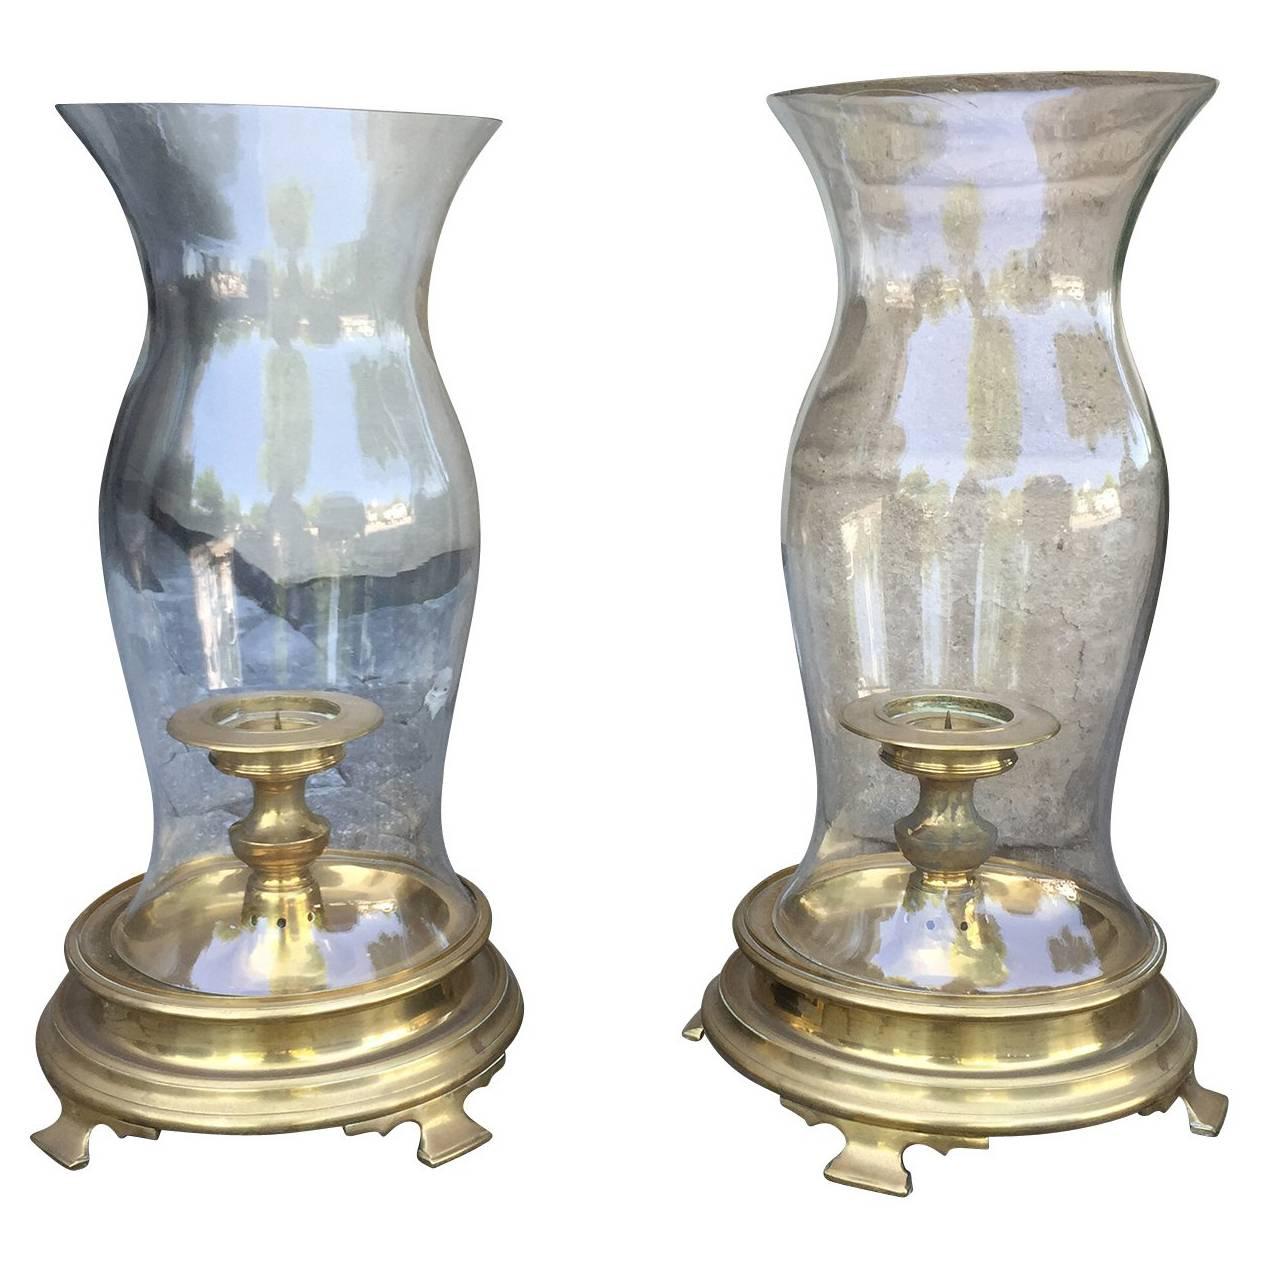 Pair of circa 1970s Brass Hurricane Stands with Globe and Candleholder